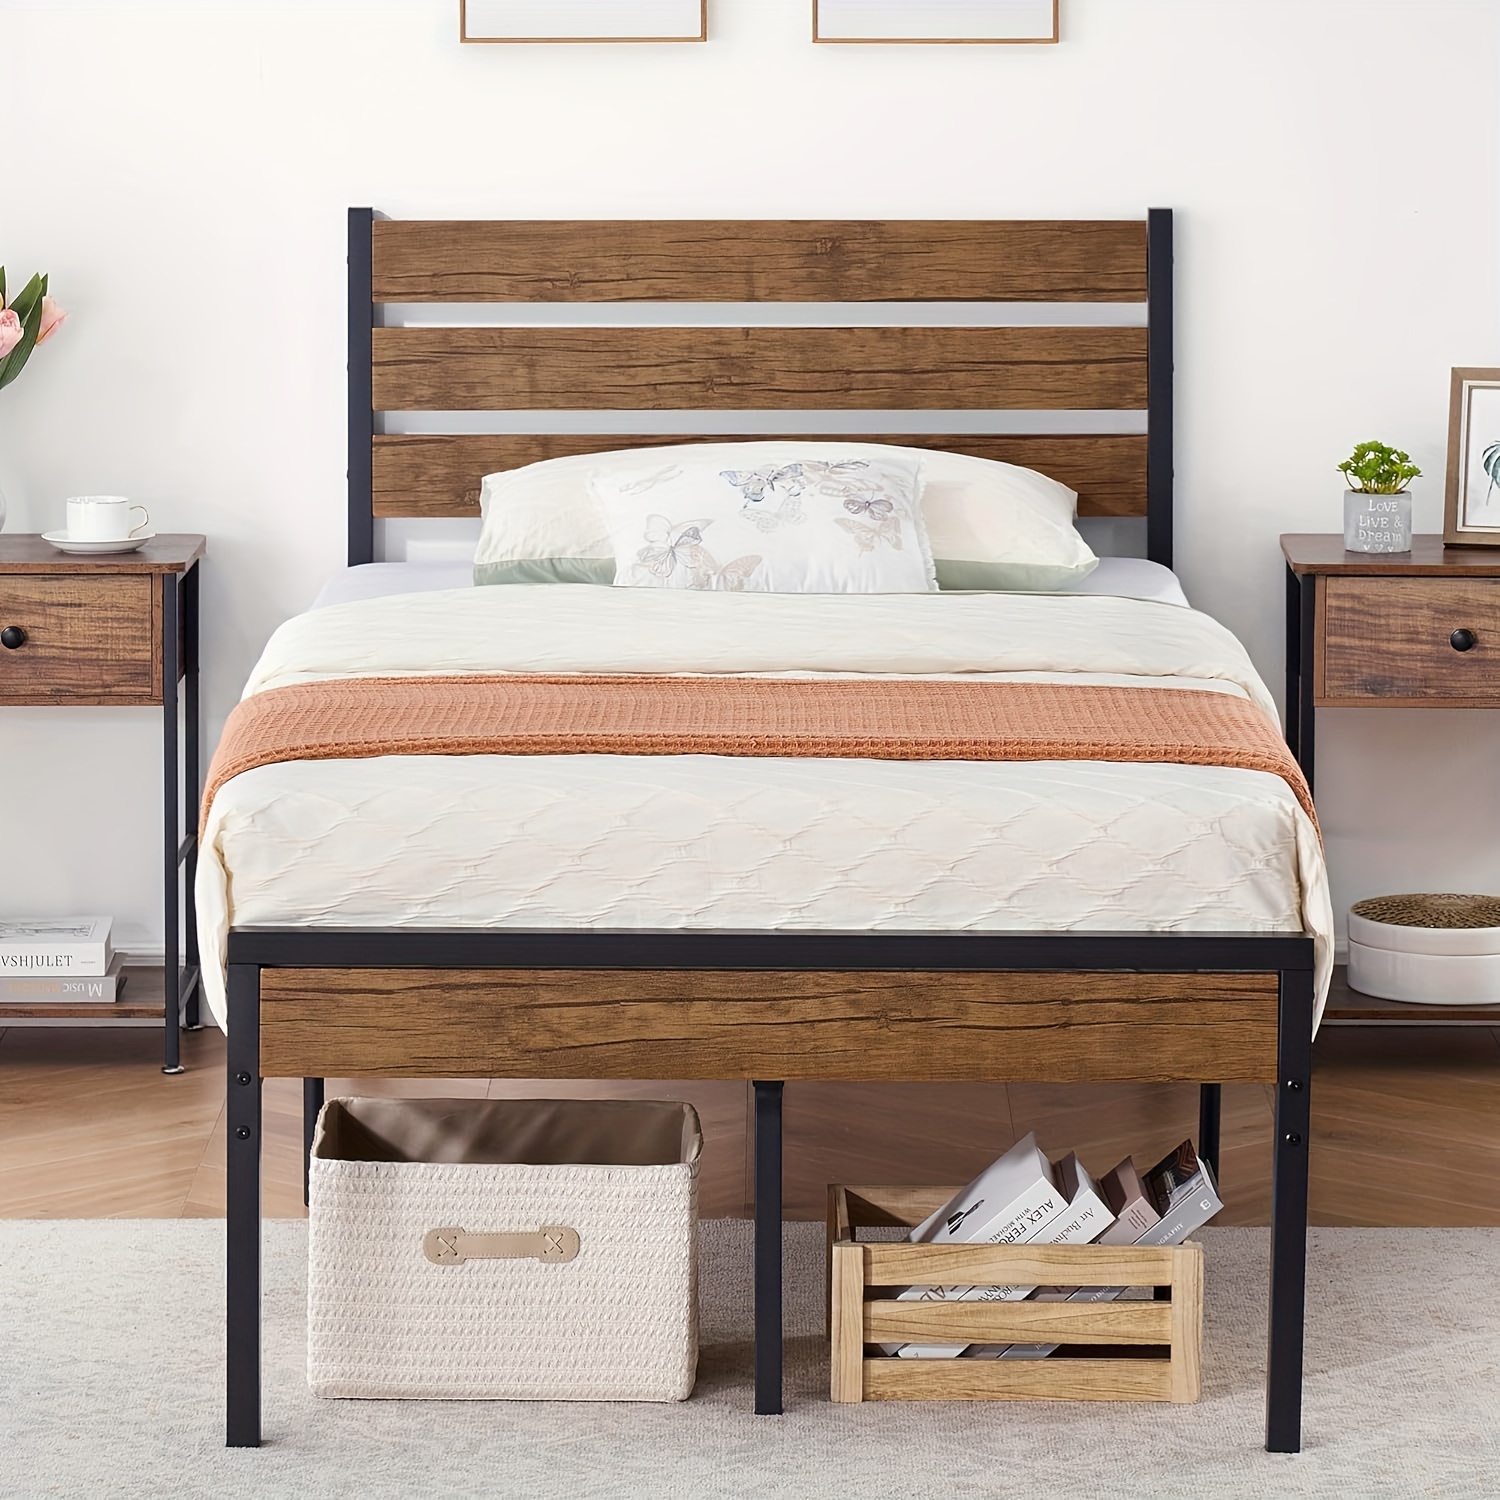 

Twin Size Bed Frame With Rustic Vintage Wood Headboard, Mattress Foundation, Strong Wood Slats Platform Support, Under Bed Storage, Noise-free, No Box Spring Needed